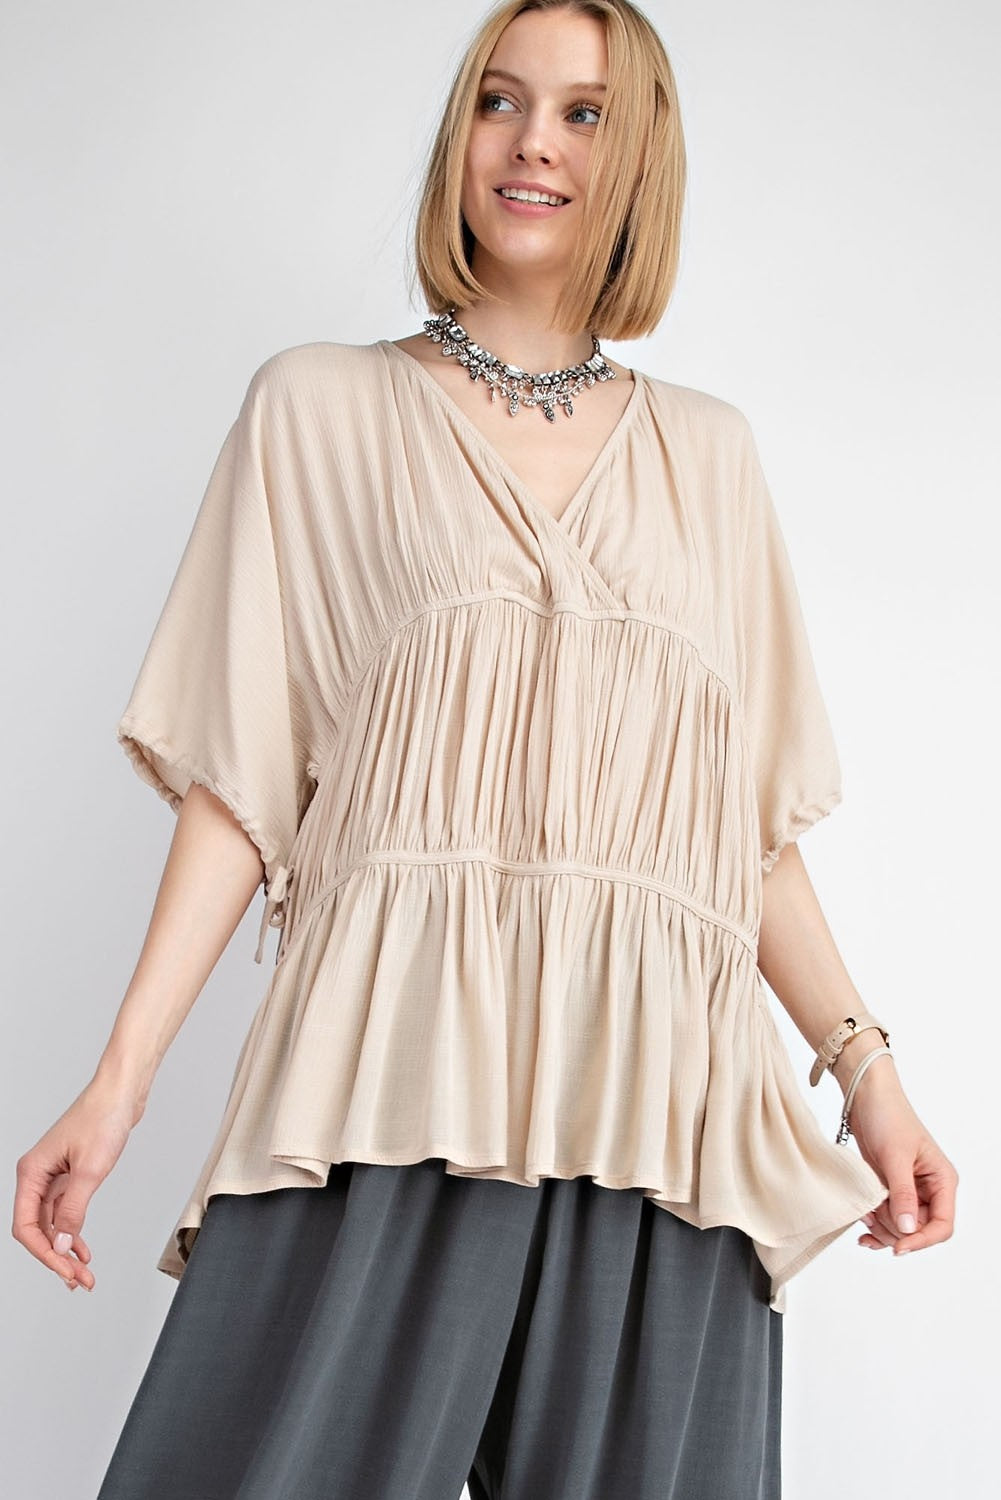 Brittan Dolman Sleeve Ruched Top - Corinne an Affordable Women's Clothing Boutique in the US USA